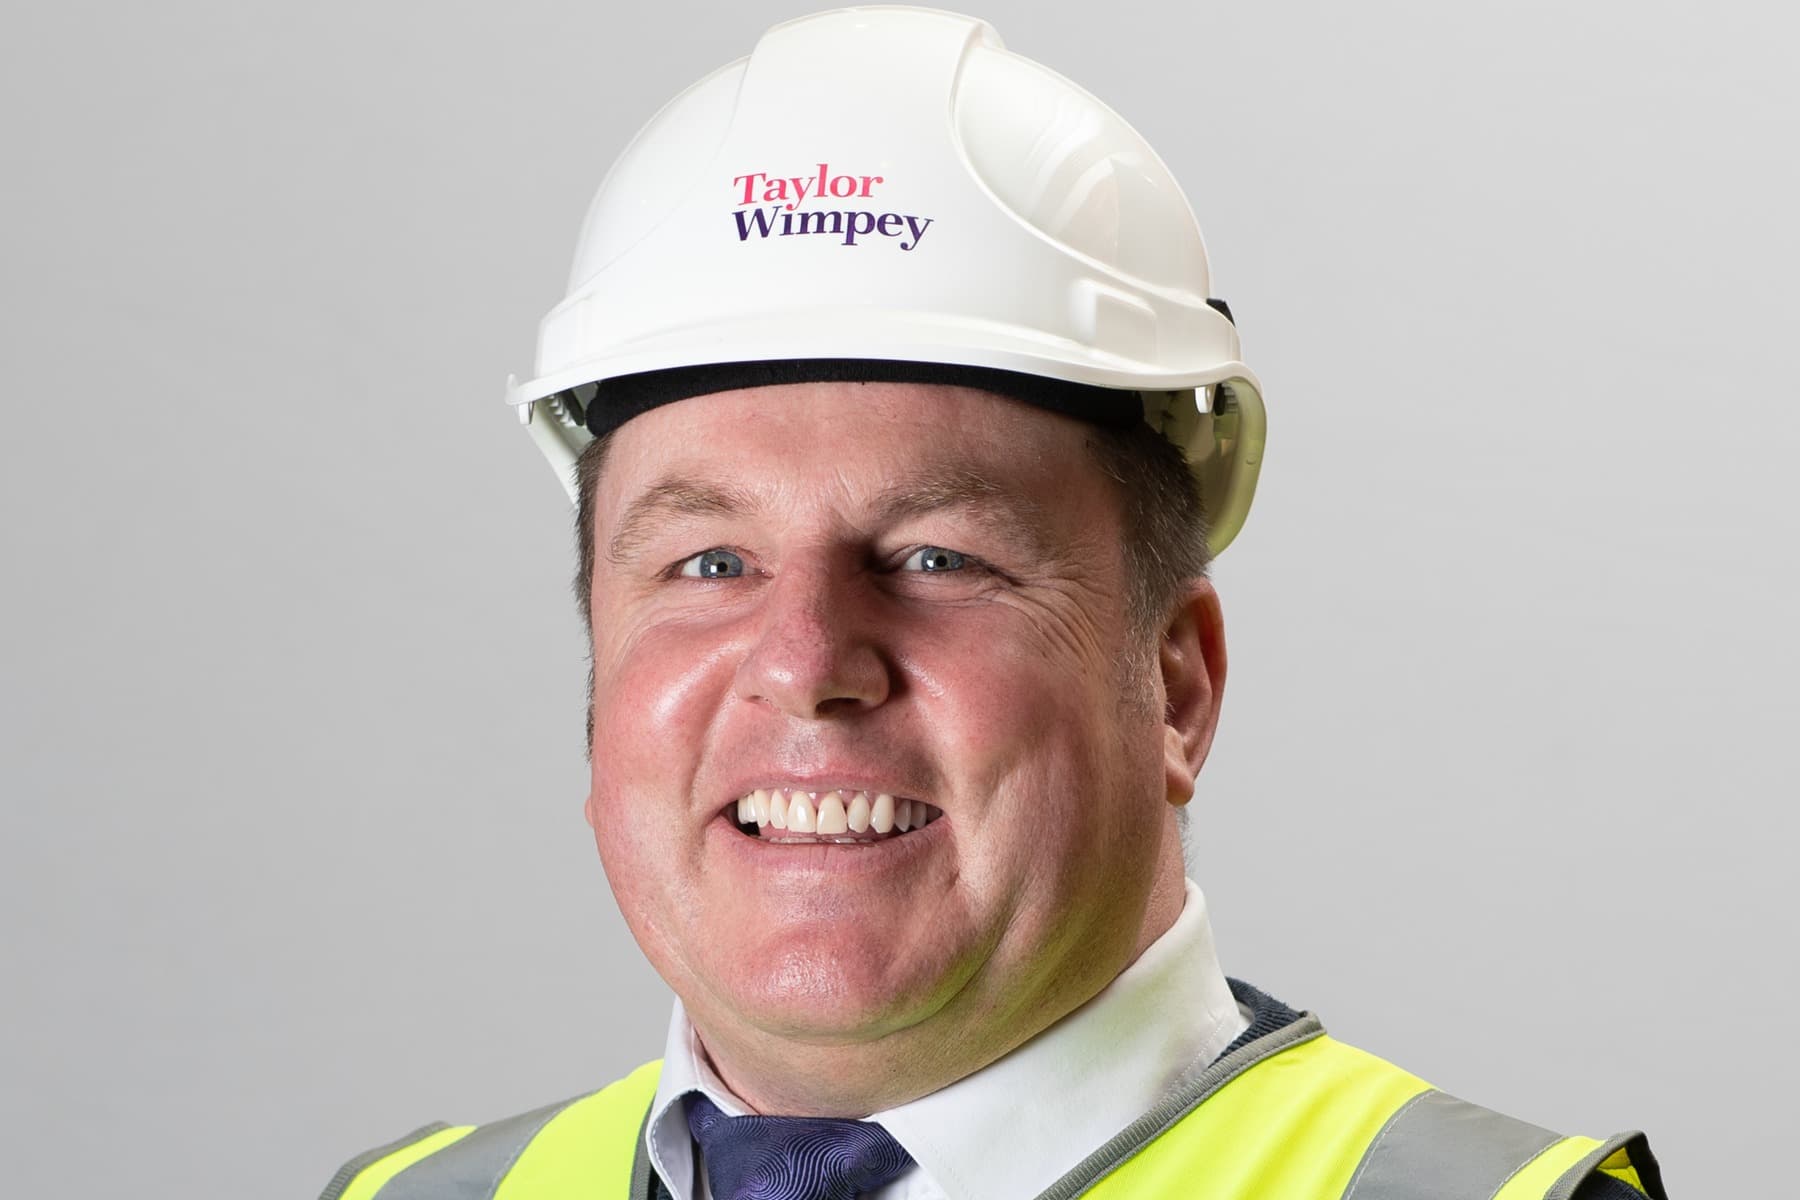 Martyn Pay, Senior Site Manager